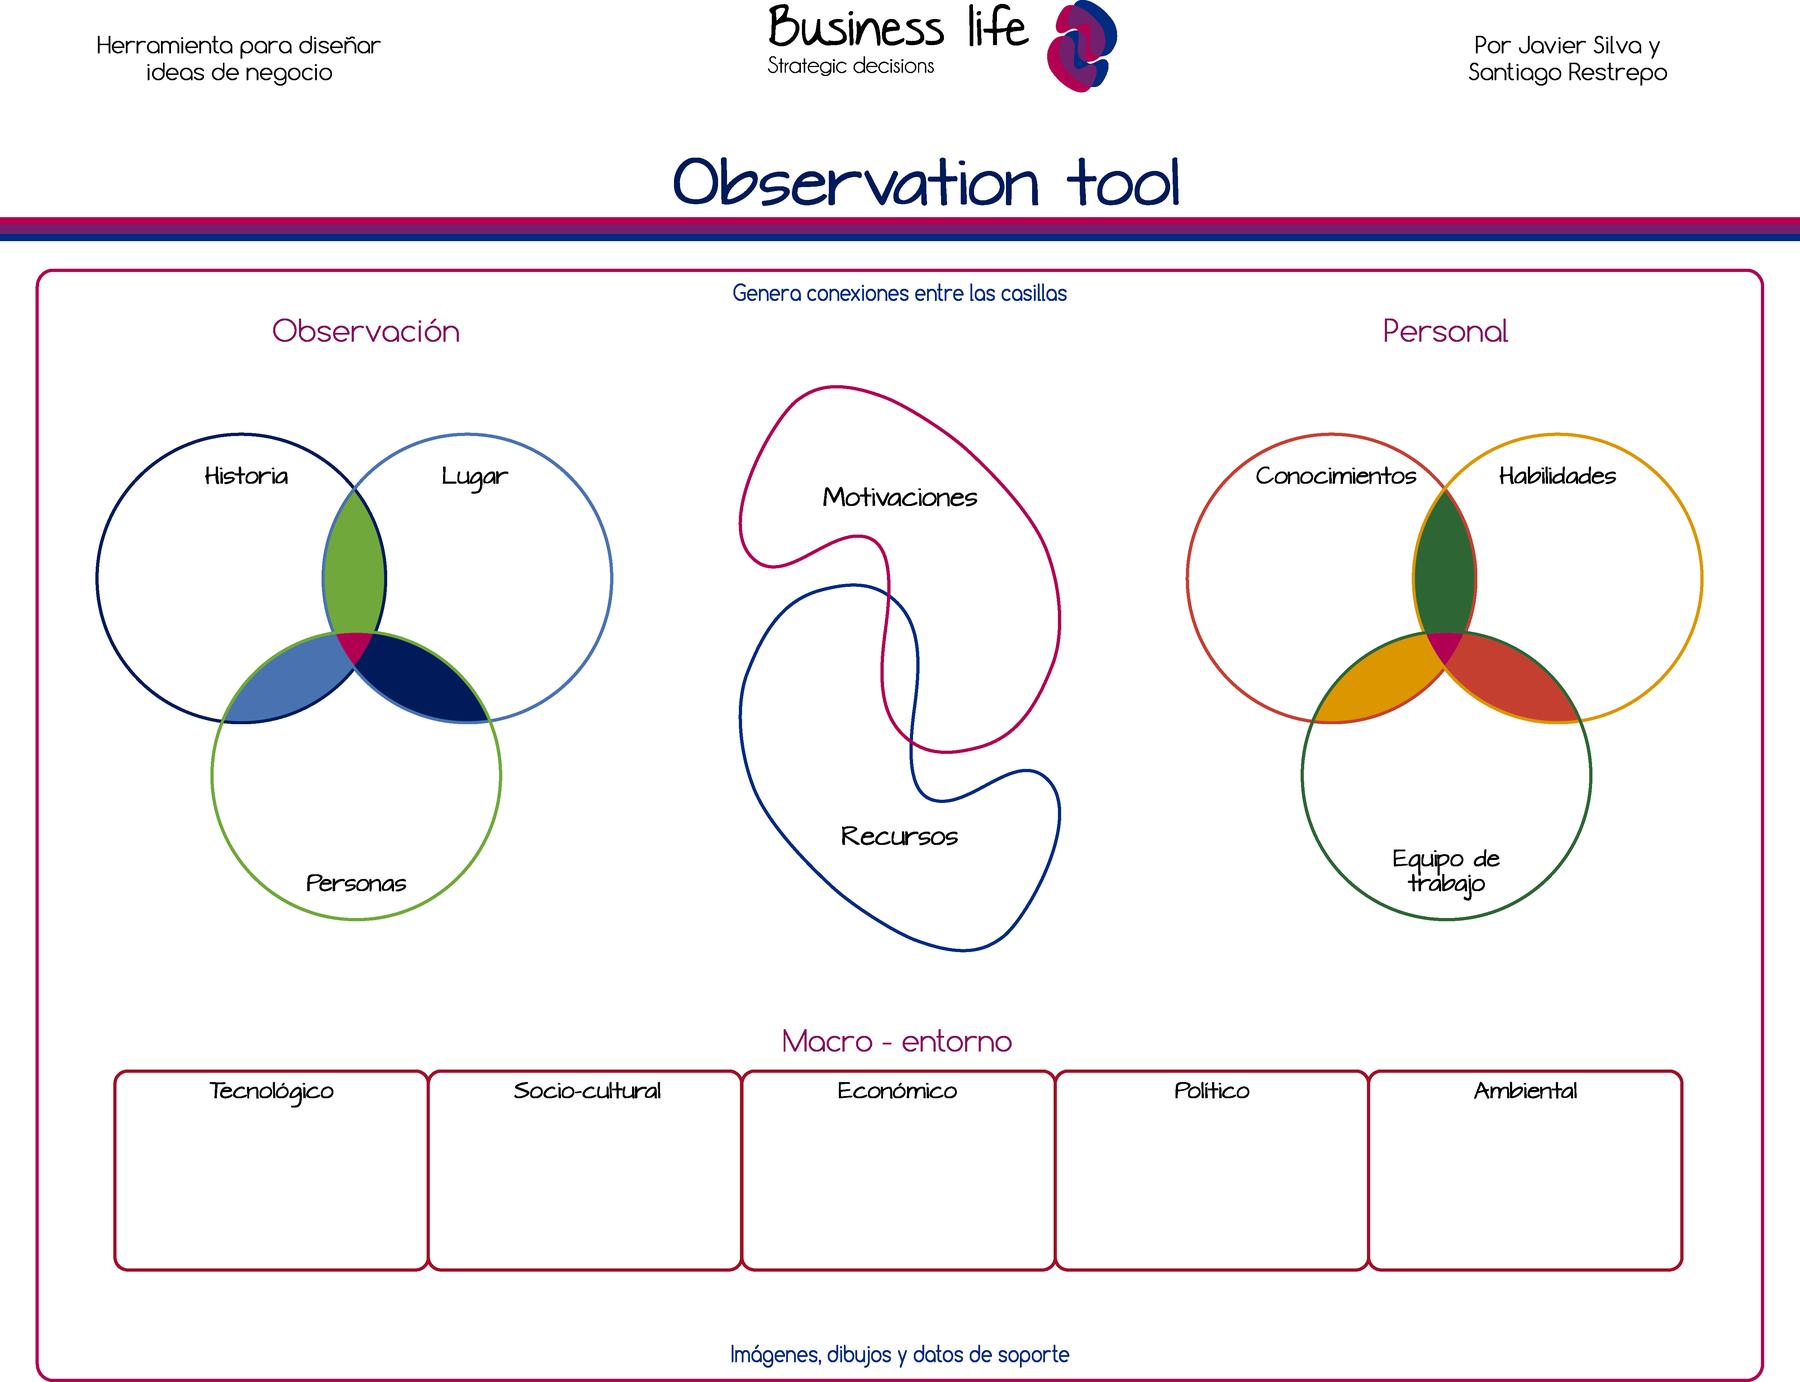 File:(Business life) Observation tool.png - a diagram of the different parts of a plant